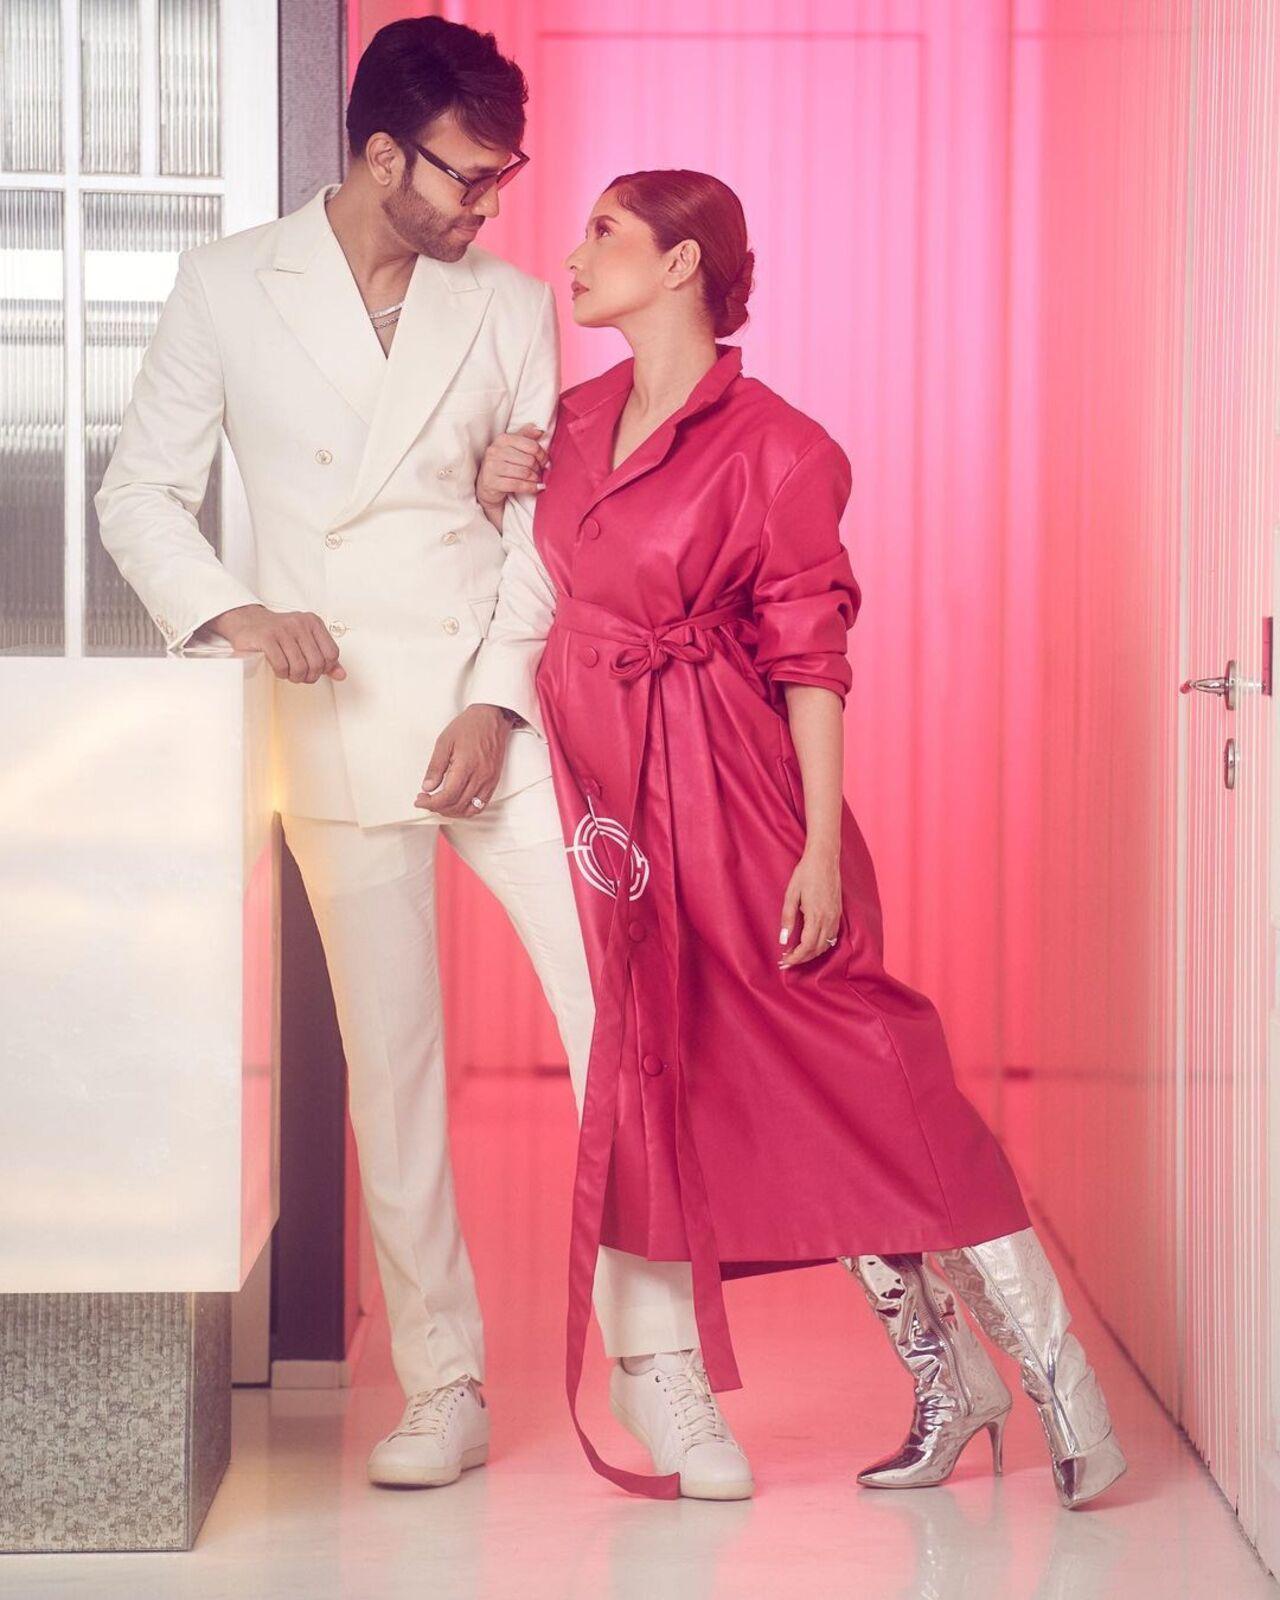 Ankita Lokhande and Vicky Jain's stylish avatar displays their ability to rock any look as a couple